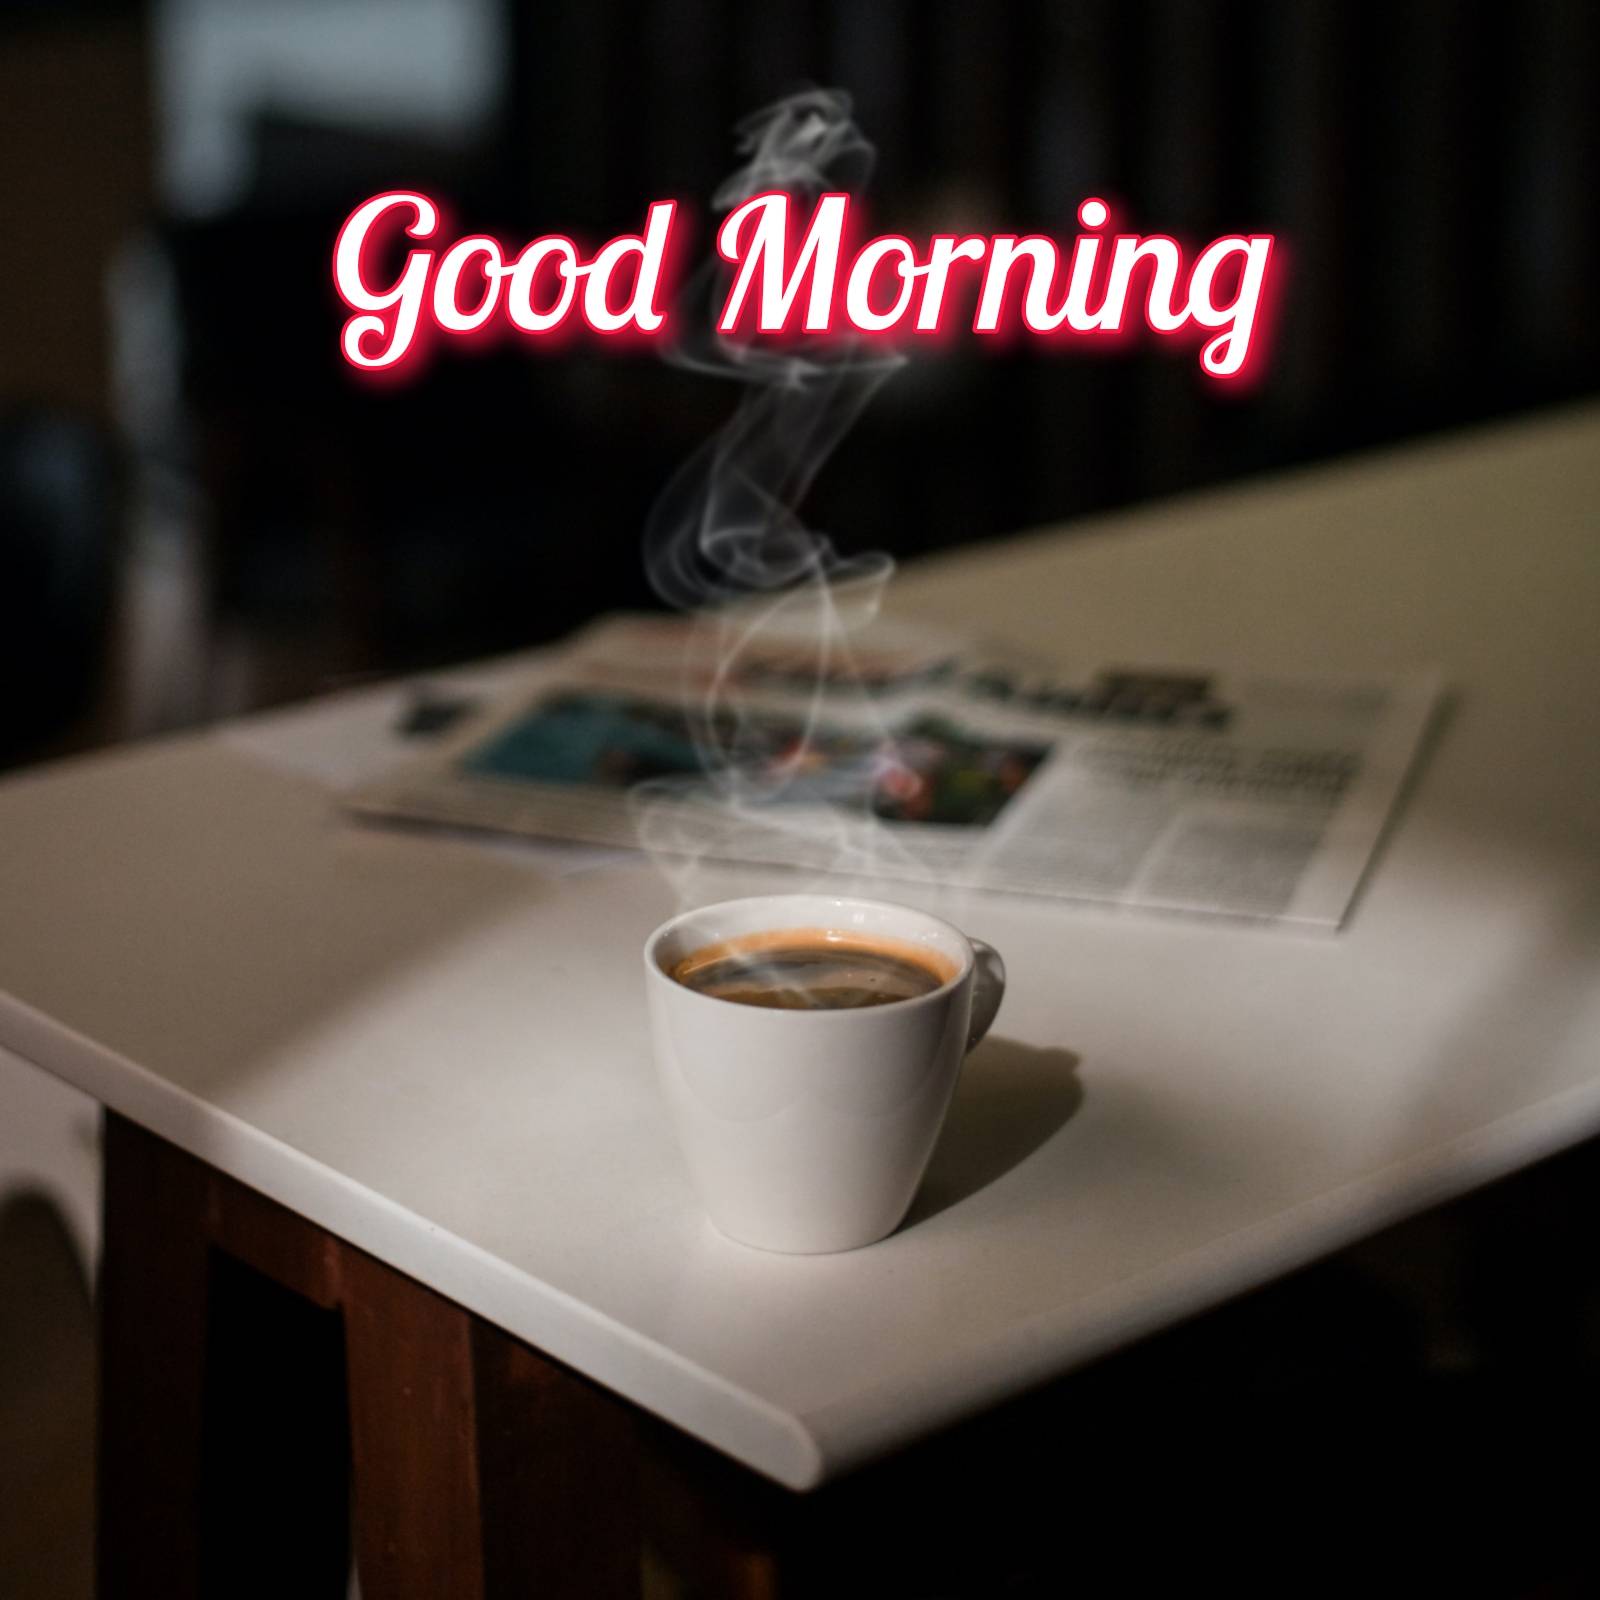 Good Morning Images With Coffee Cup